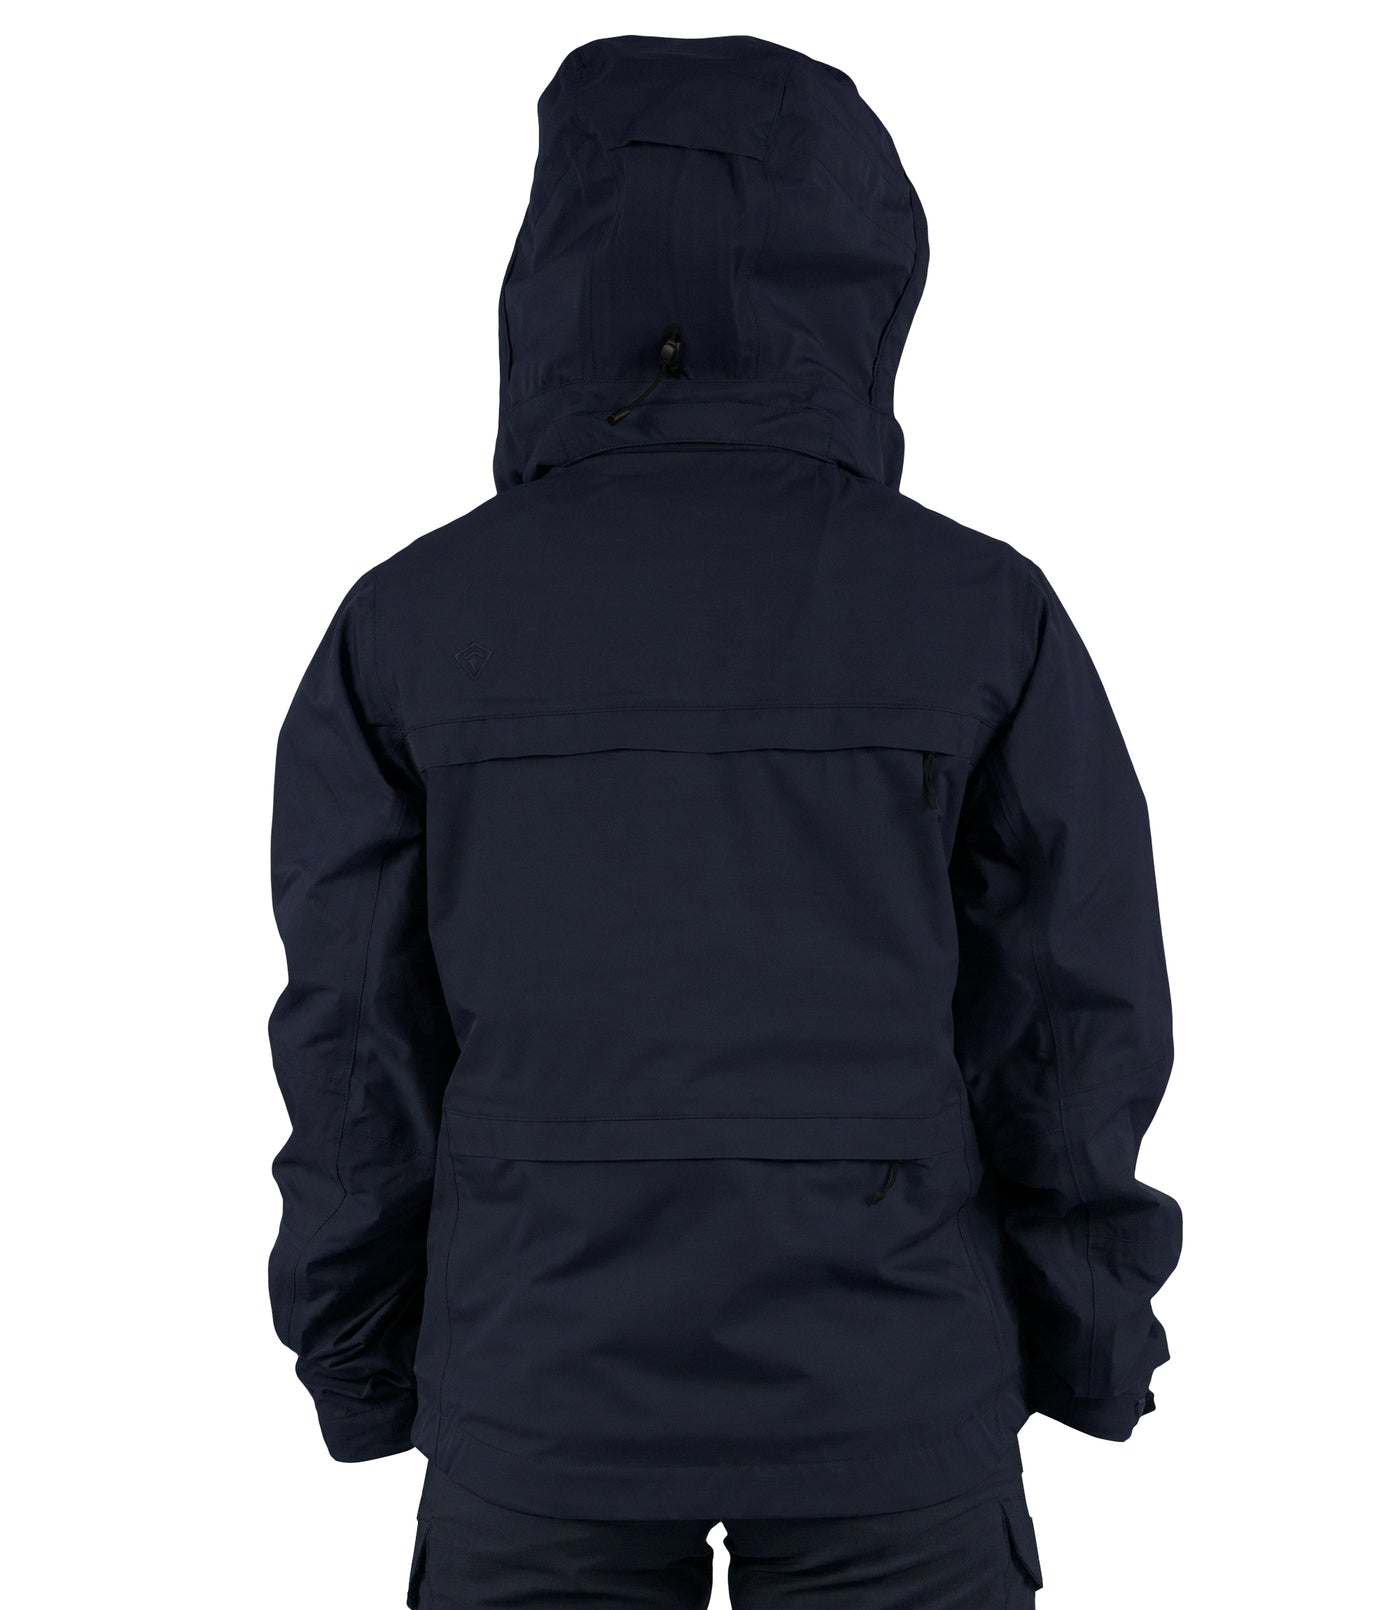 Back Hood of Women’s Tactix System Jacket in Midnight Navy